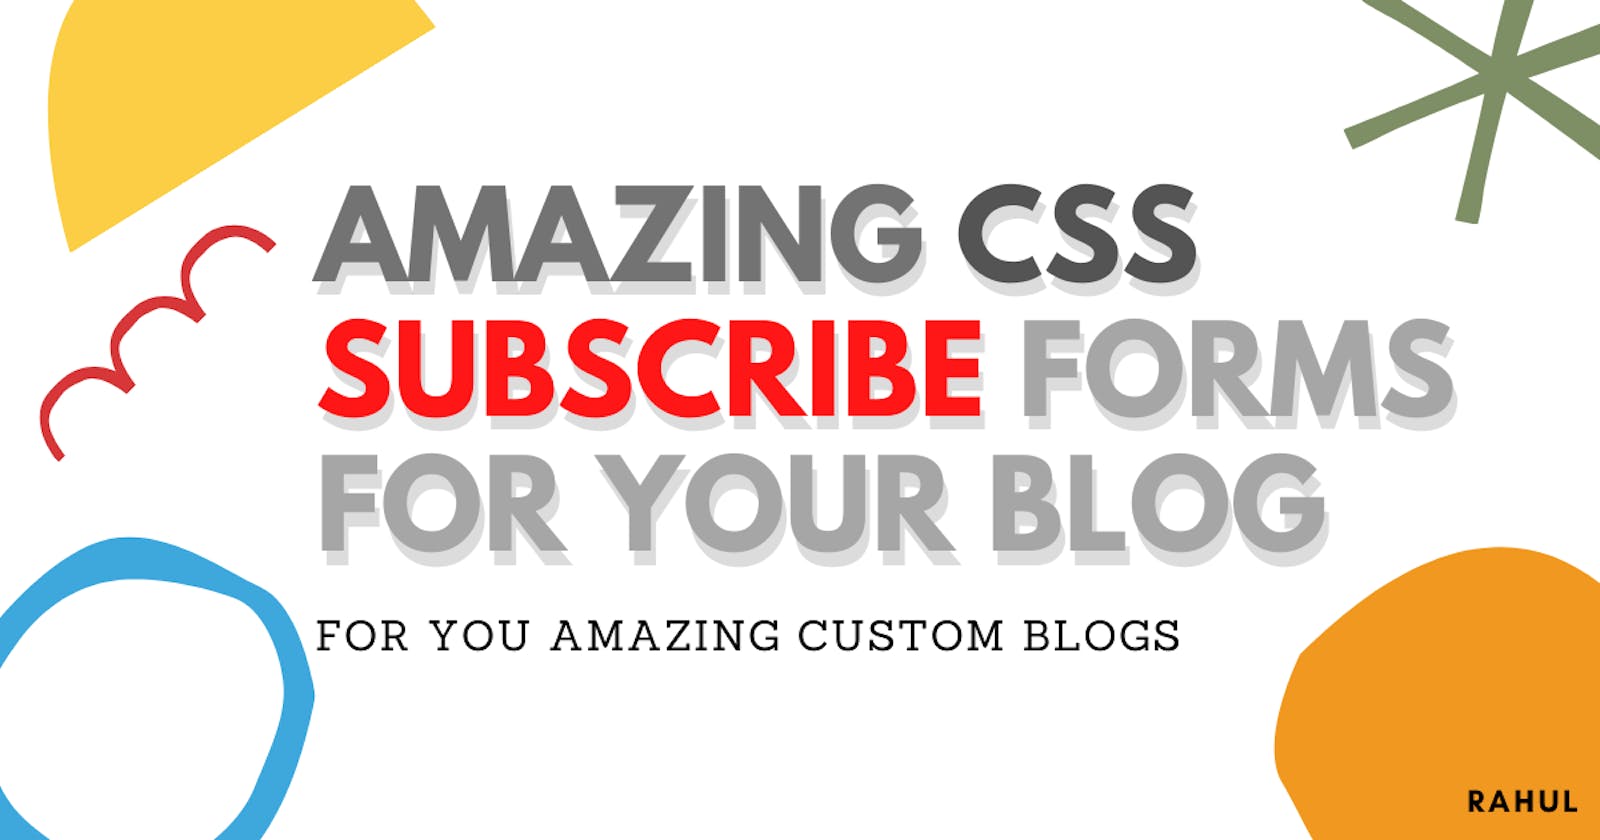 Amazing and animated CSS subscribe forms you need for your website